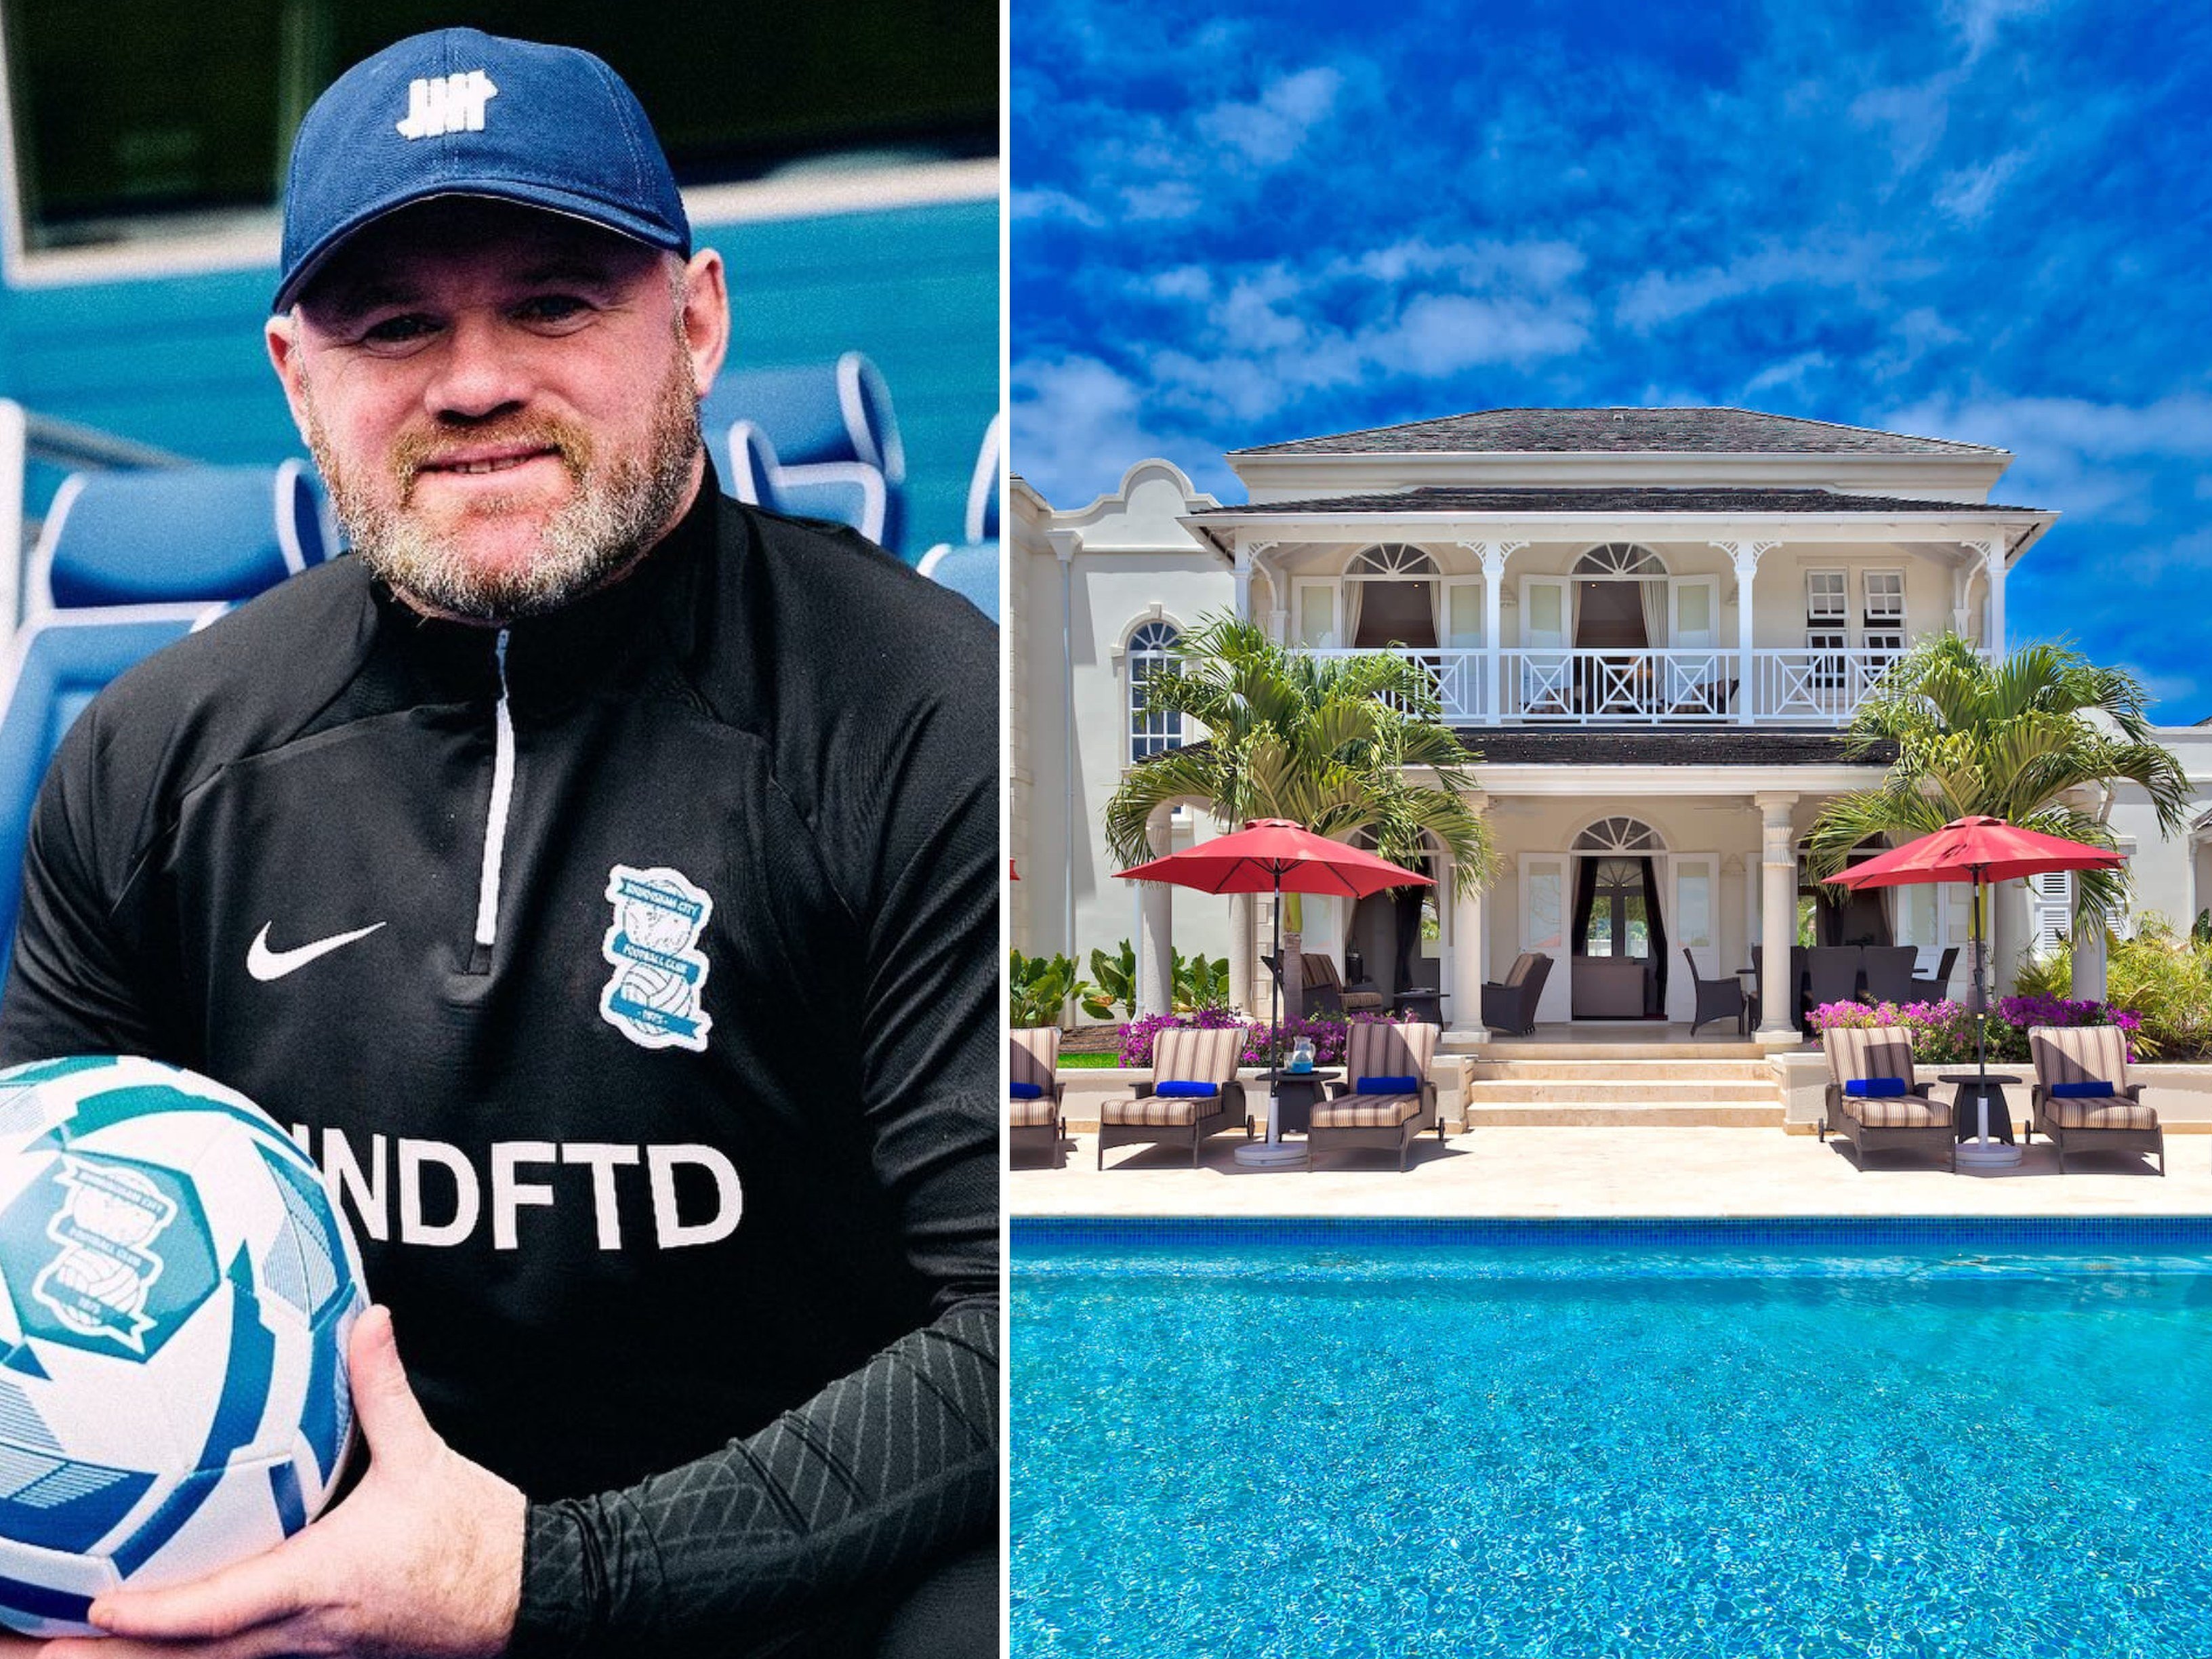 Baller: Wayne Rooney’s talent and wealth have helped him amass quite the property portfolio over the years. Photos: @waynerooney/Instagram, Royal Westmoreland Estate